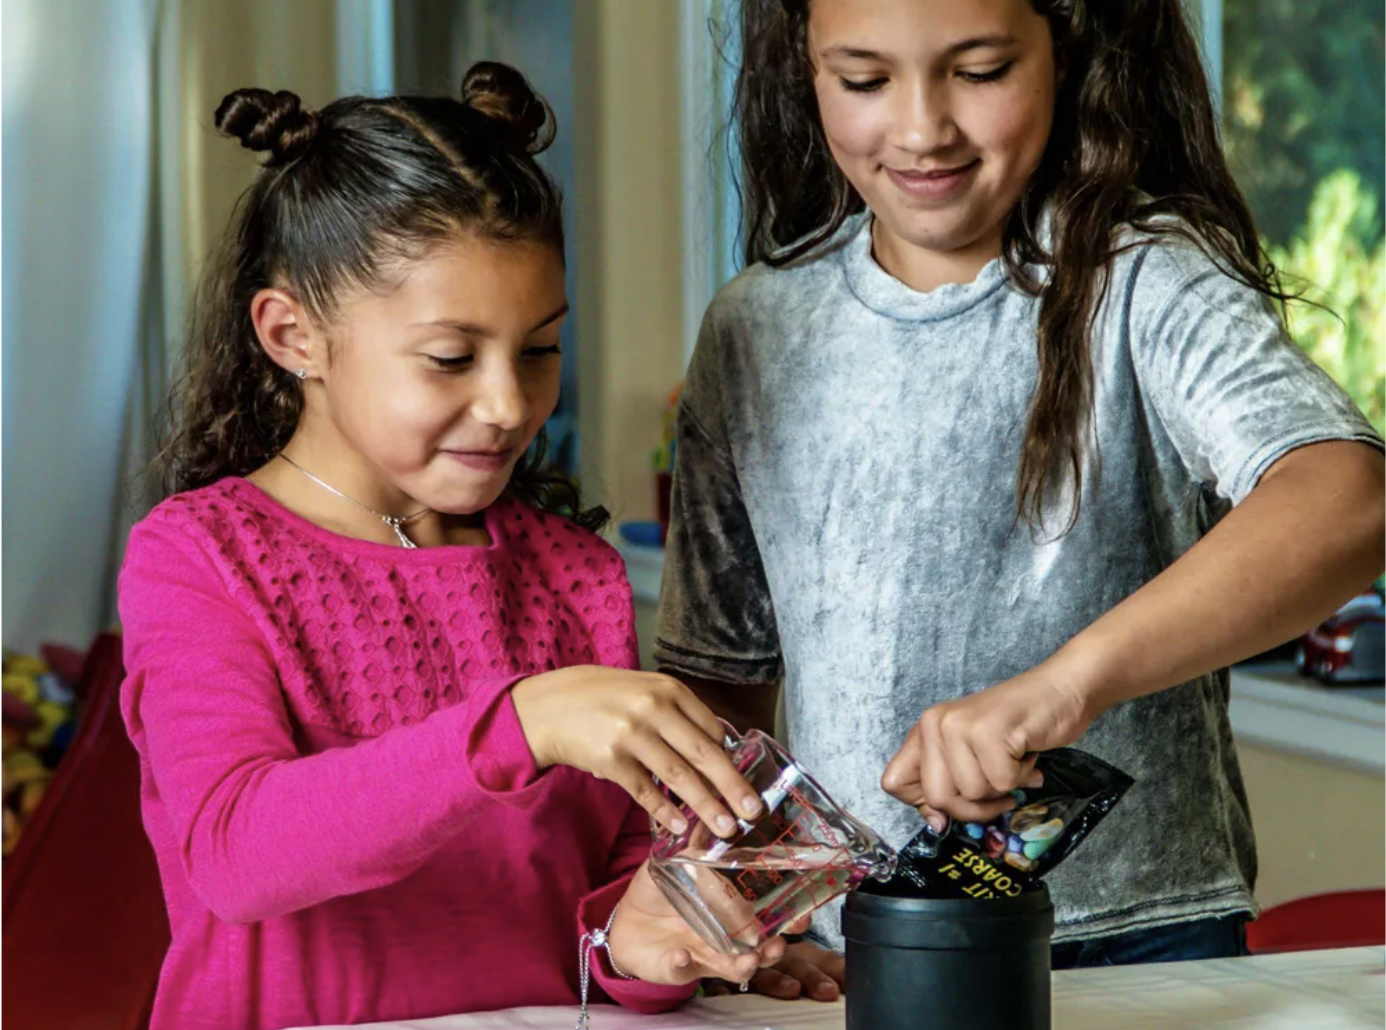 Two girls holding component parts of the Nat Geo Rock Tumbler kit while following the kit's instructions